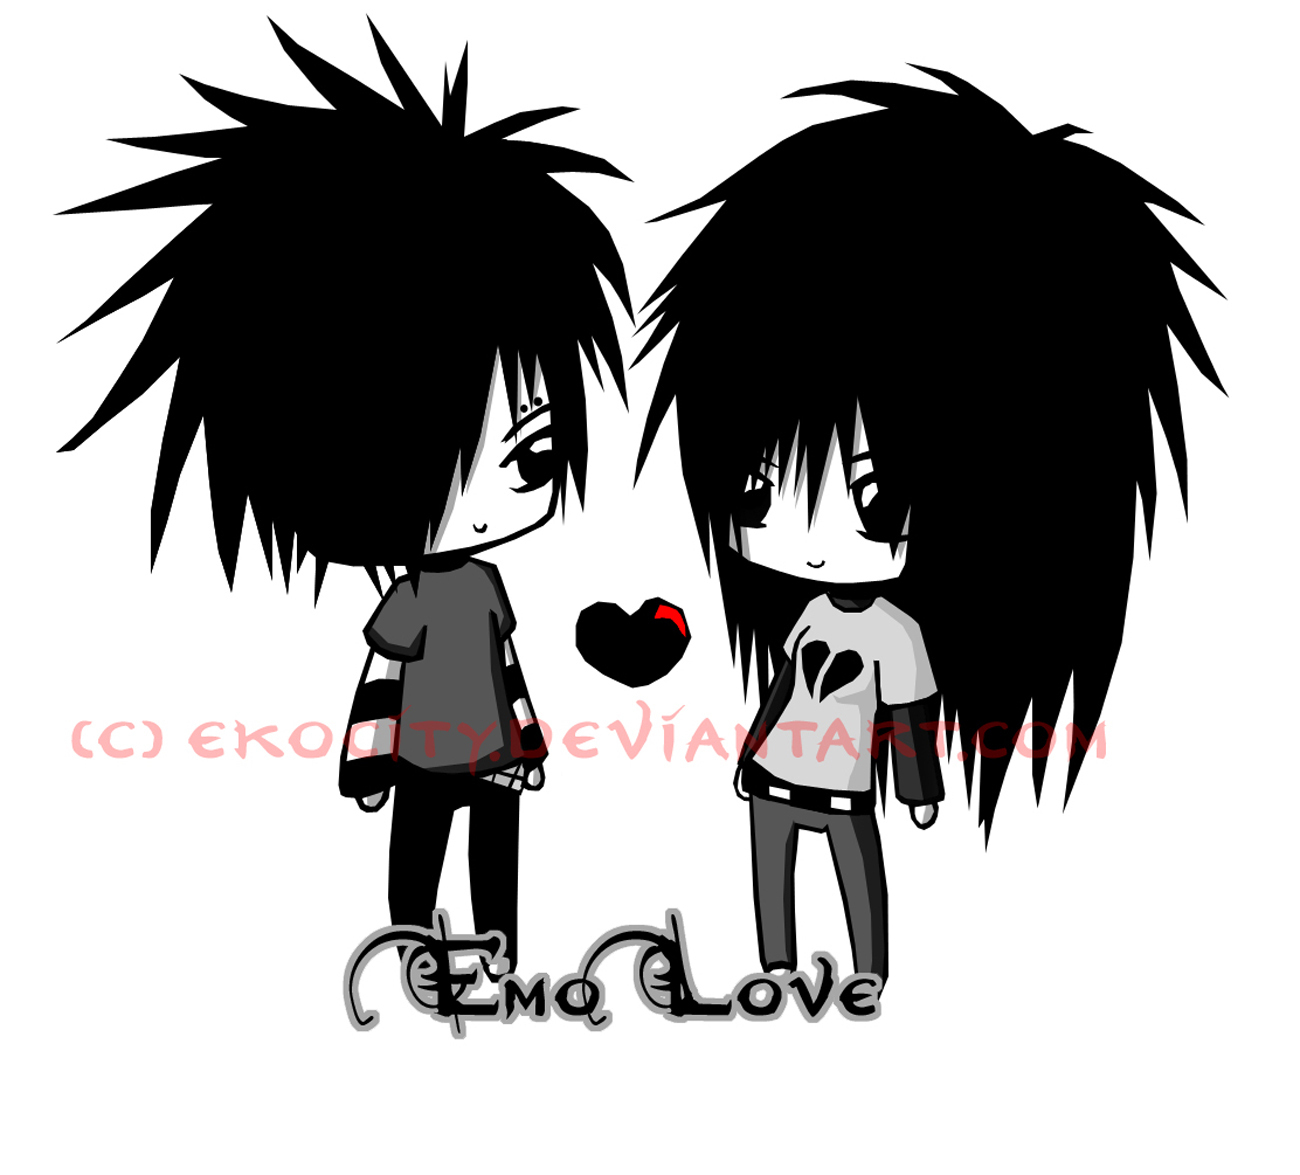 Download Free Wallpapers Emo love